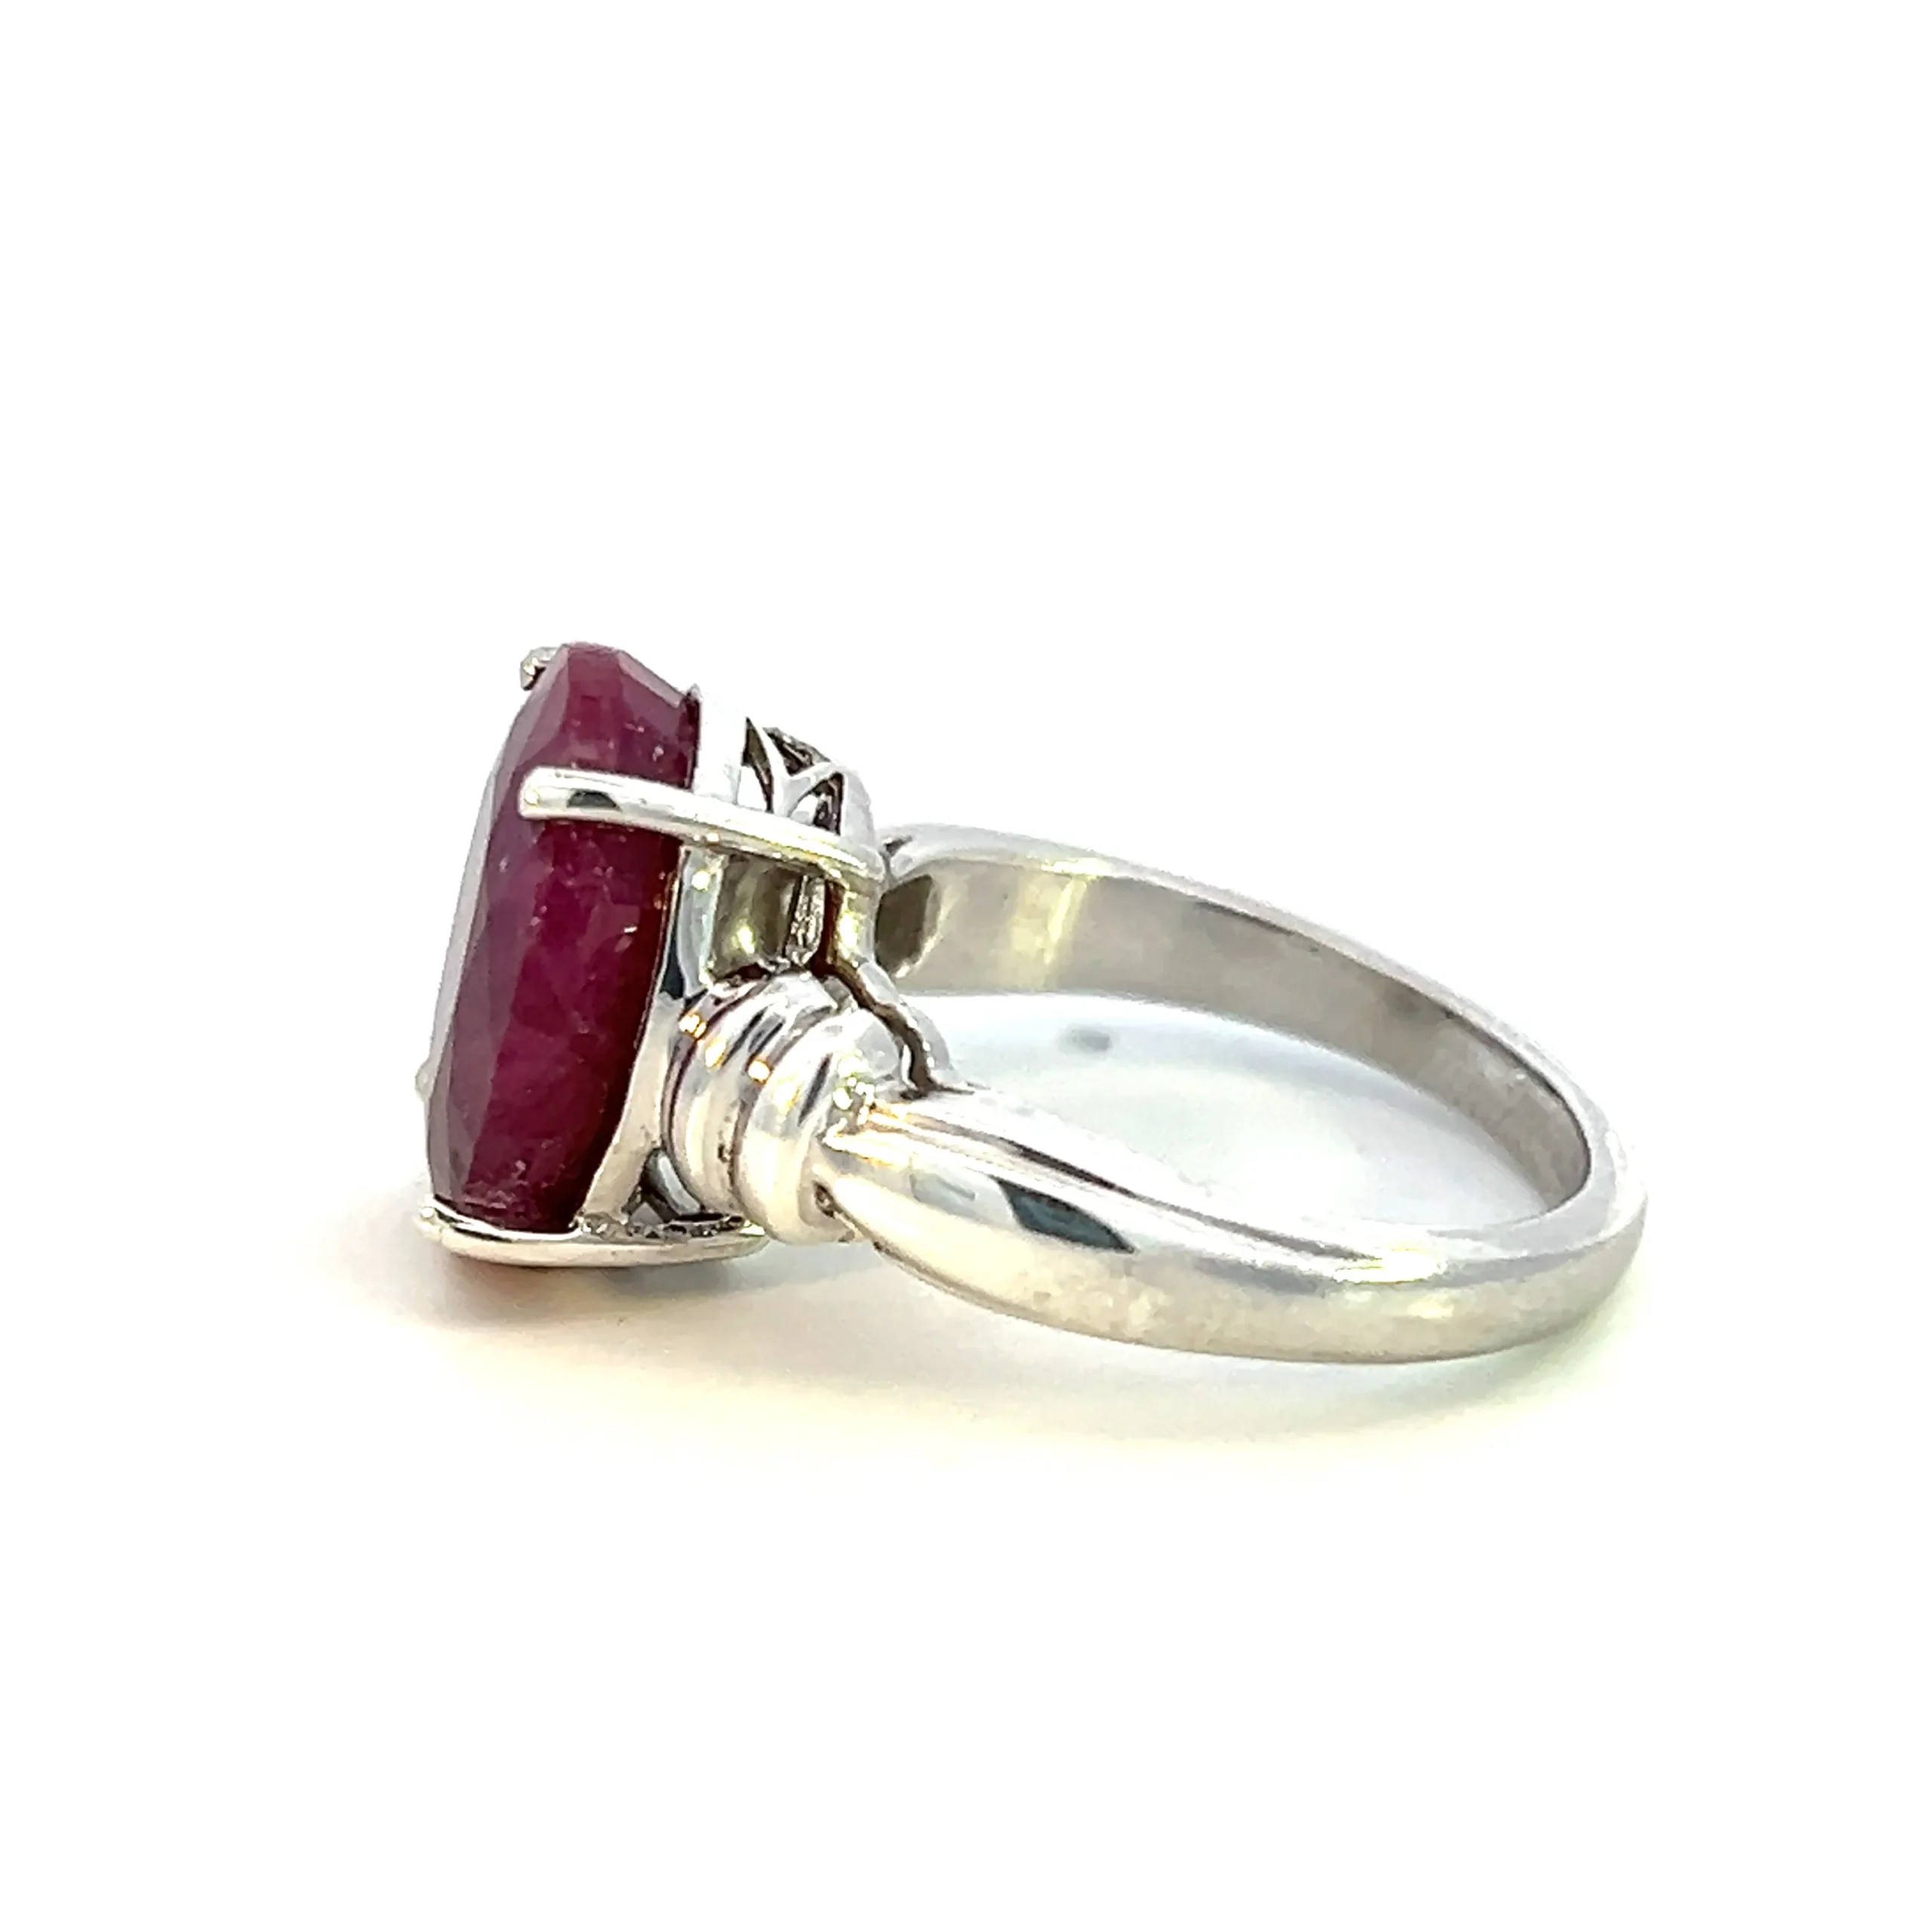 Estate sterling silver ring with an oval-shaped faceted lab-created ruby and fluted accents.